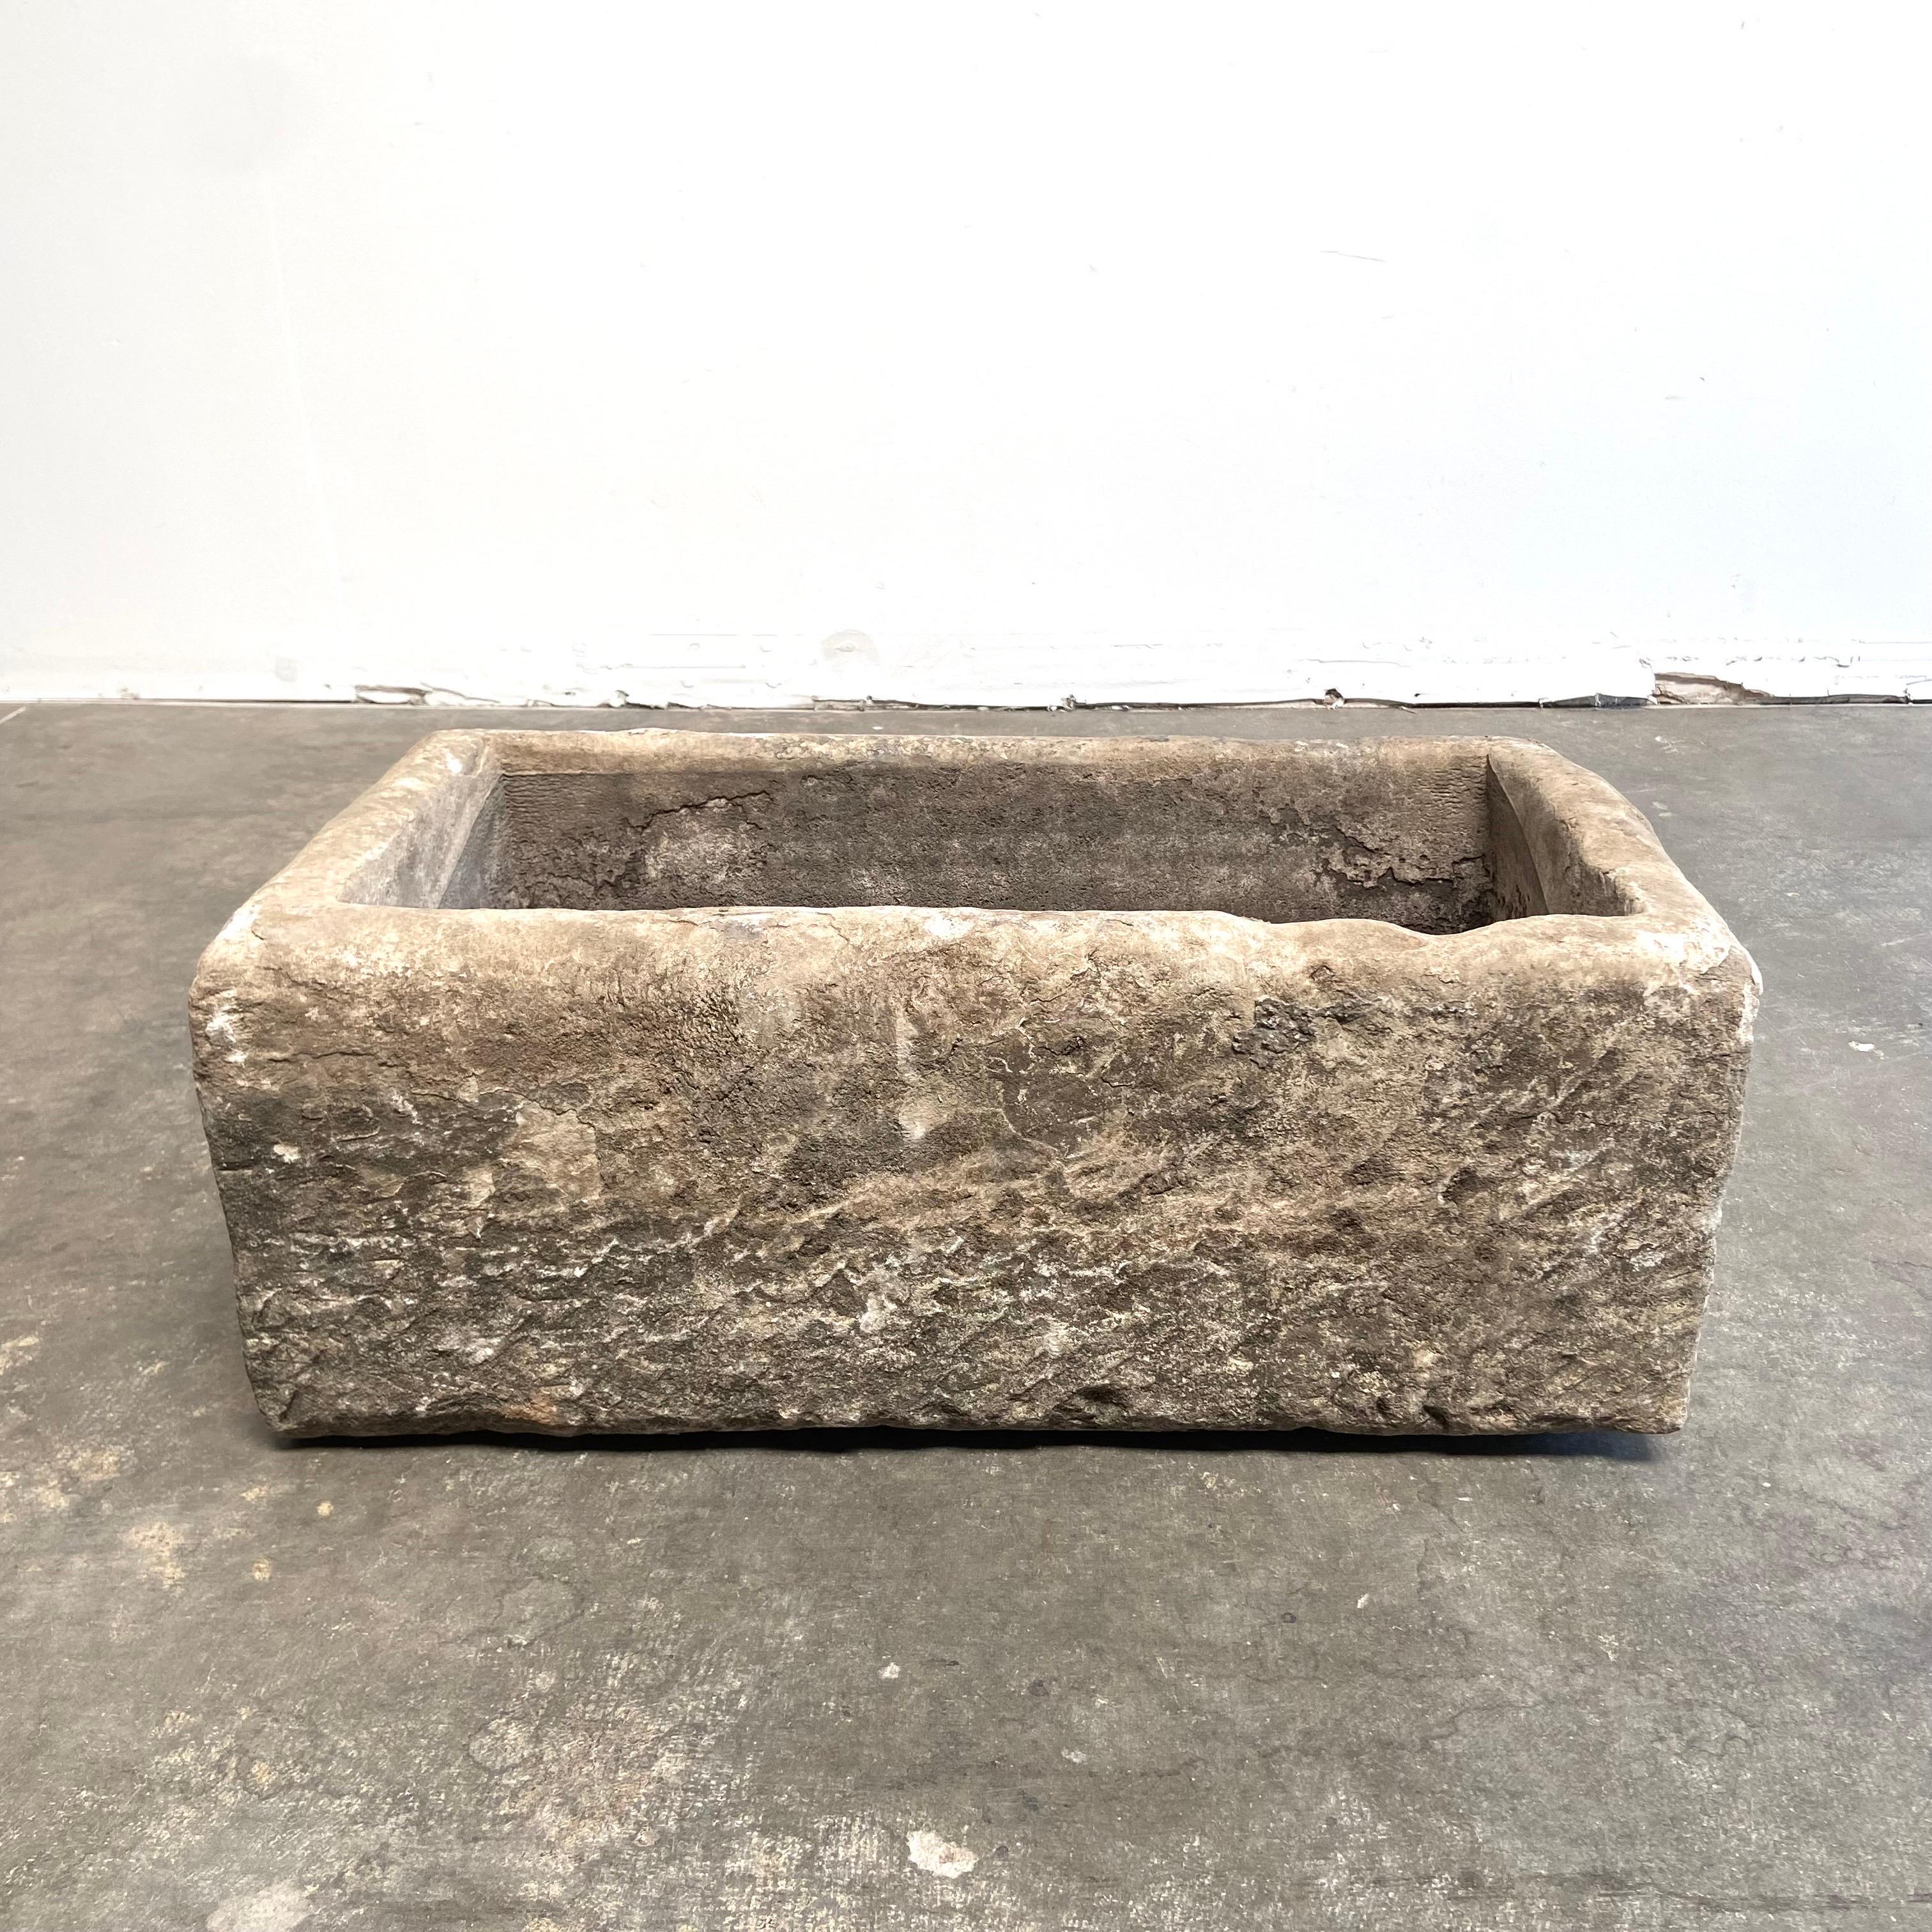 Antique European limestone trough
Great for use as a fountain, planter, or garden element.
Size: 34”w x 19”d x 14”h